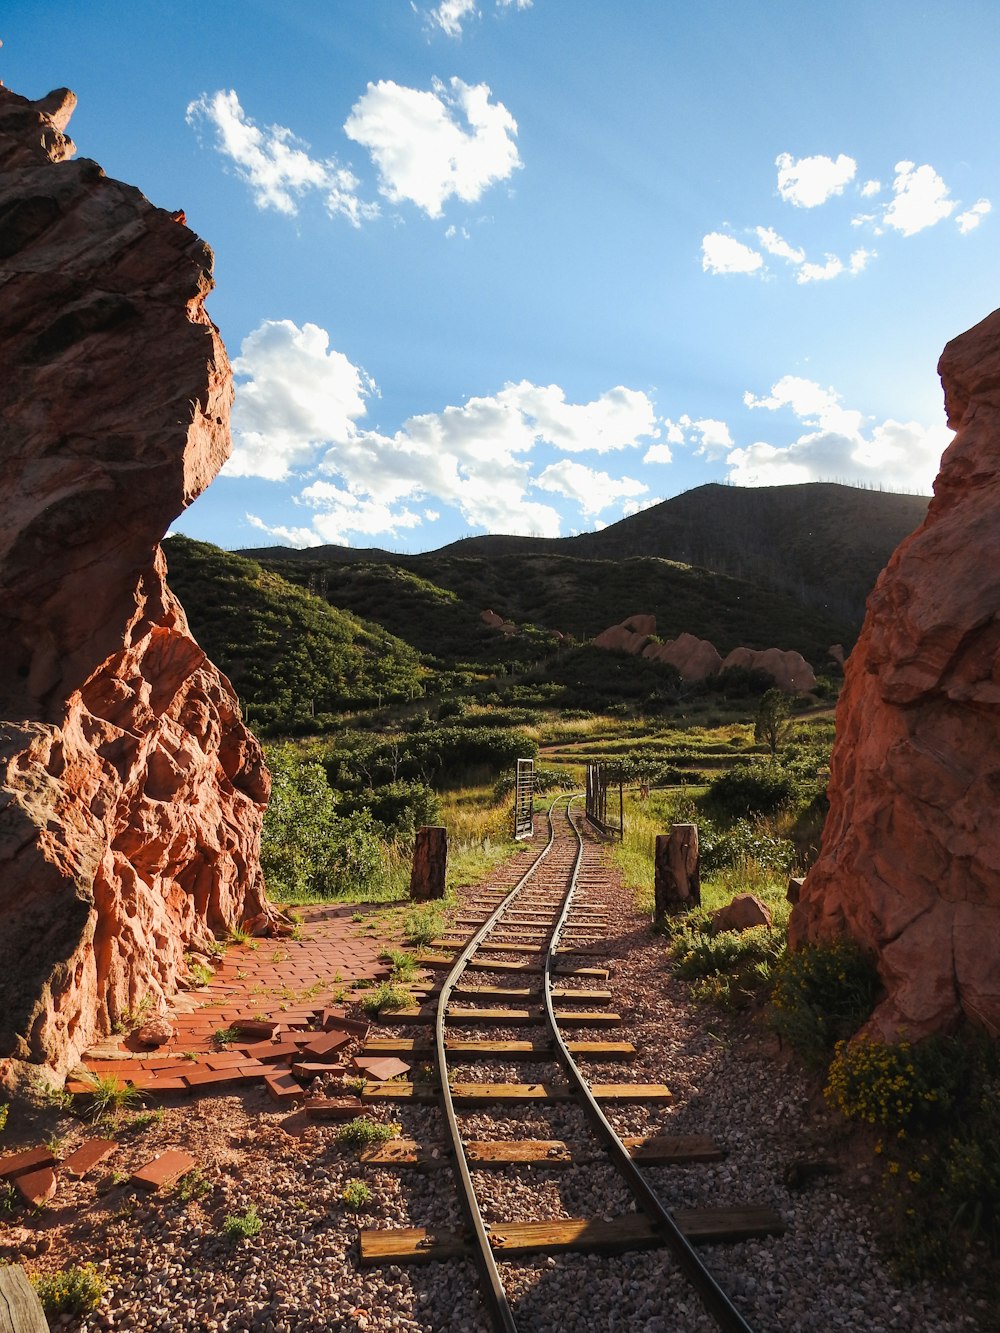 a train track going through a rocky landscape